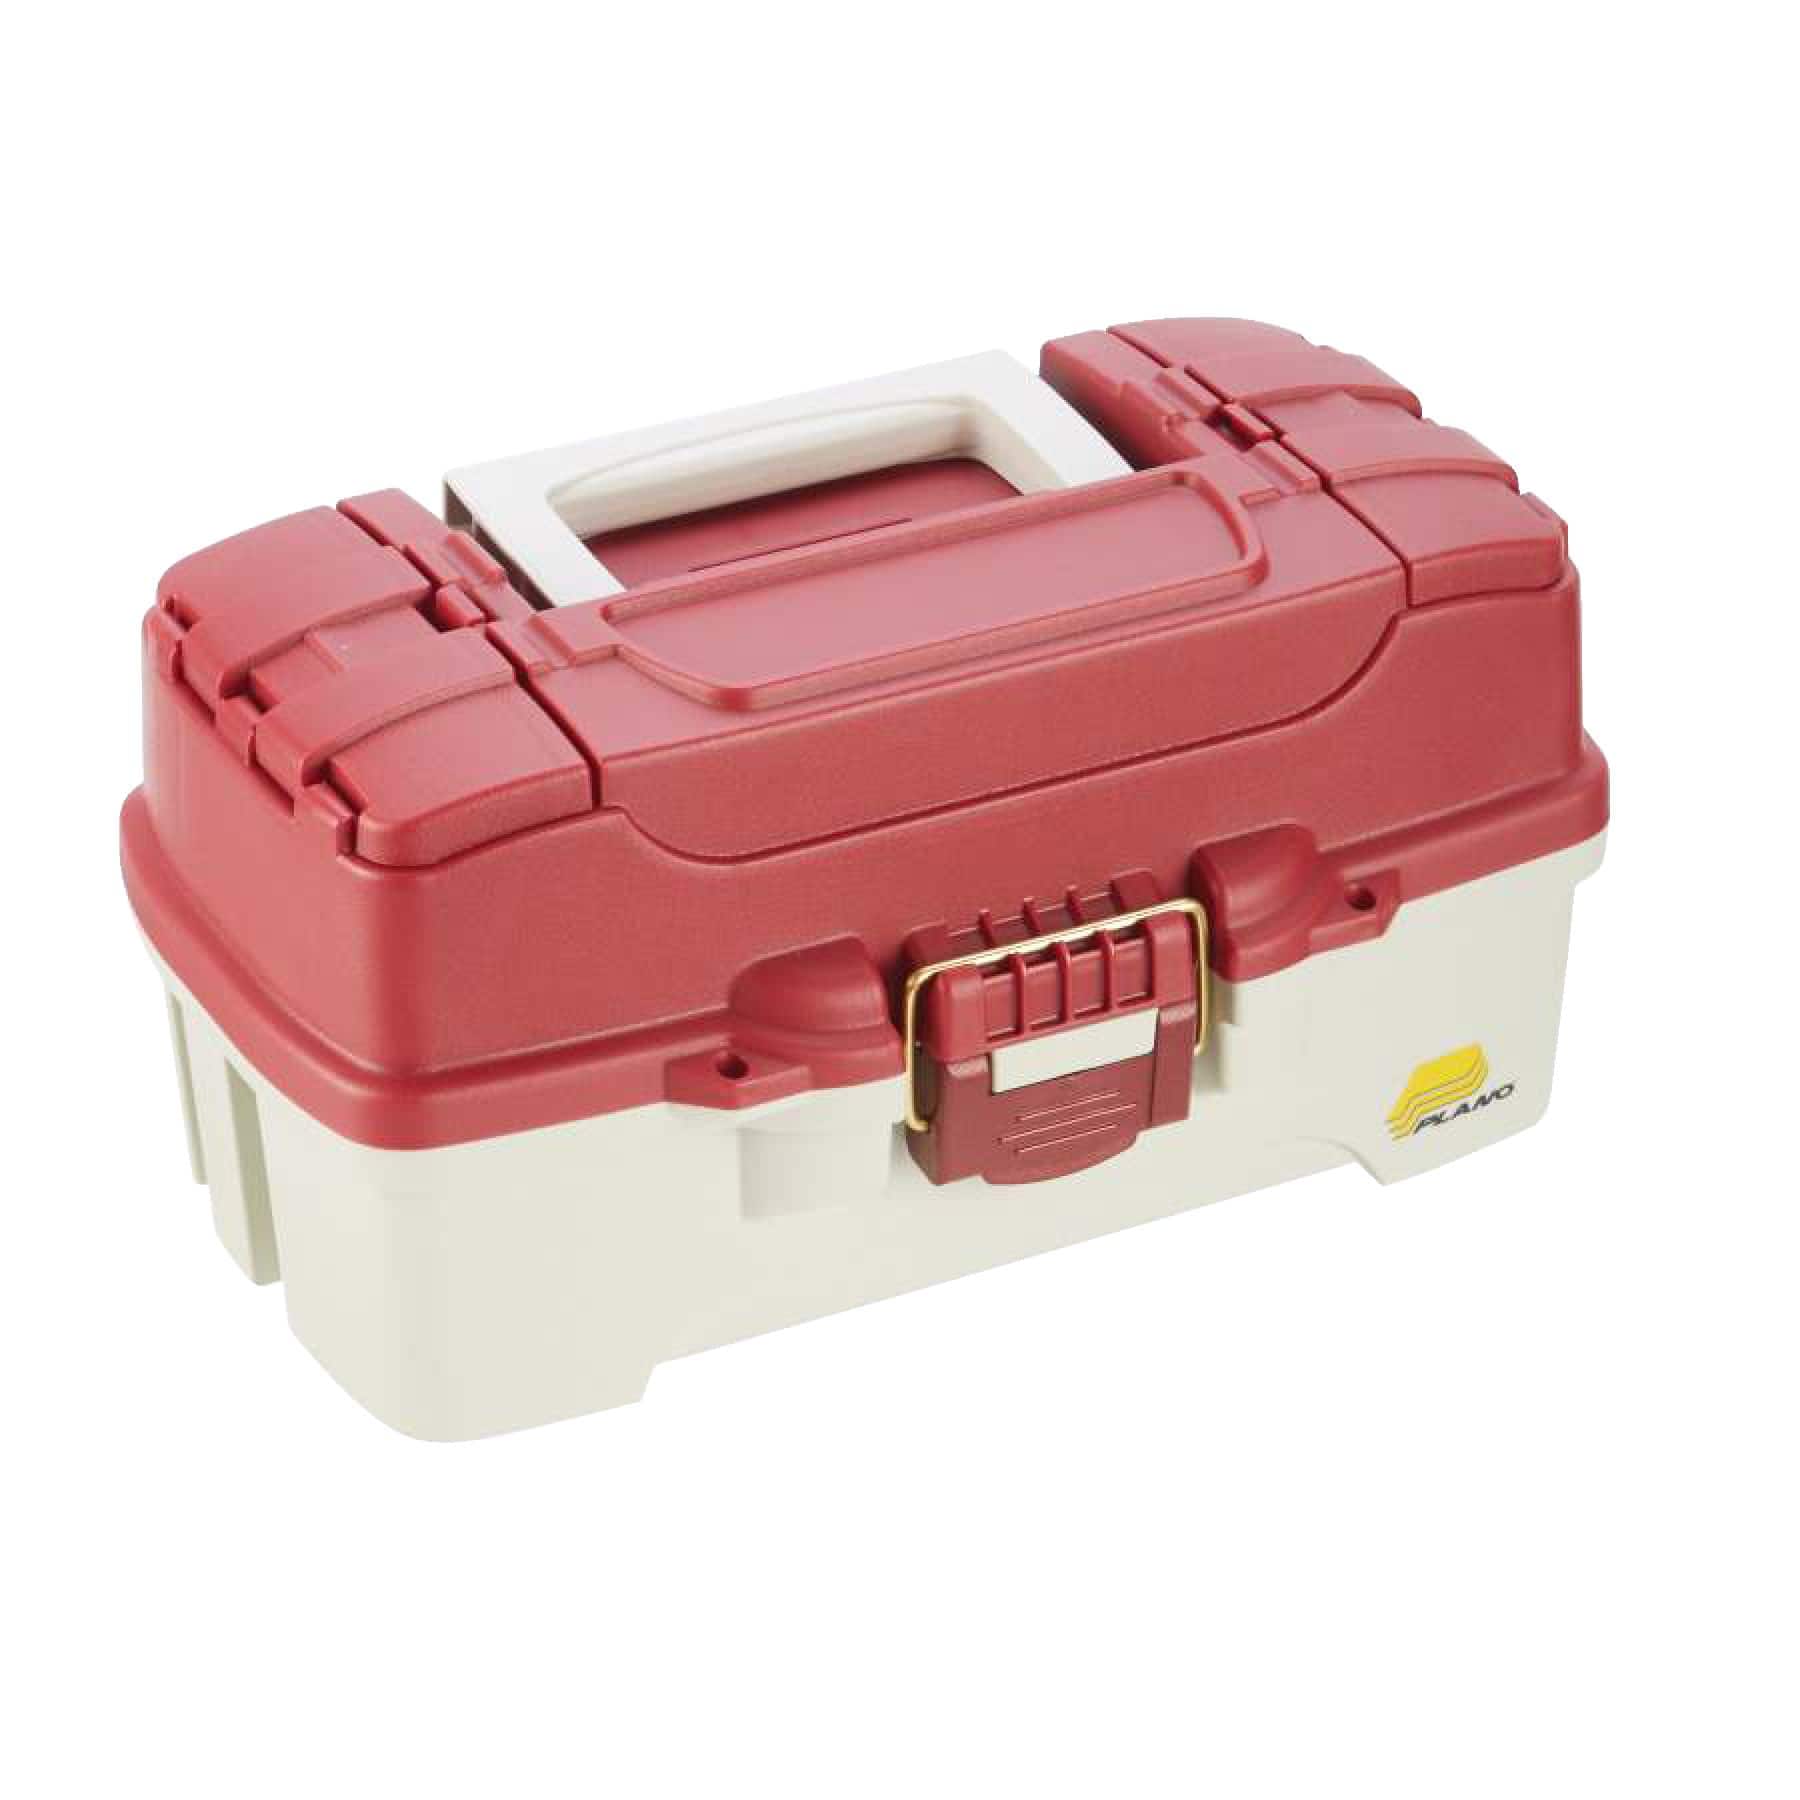 Fishing Tackle Boxes Fishing Lure Hook Tackle Box Storage Case Portable Organizer  Fishing Box Fishing Gear Accessories Storage of Baits Hook Tackle Box :  : Sports & Outdoors